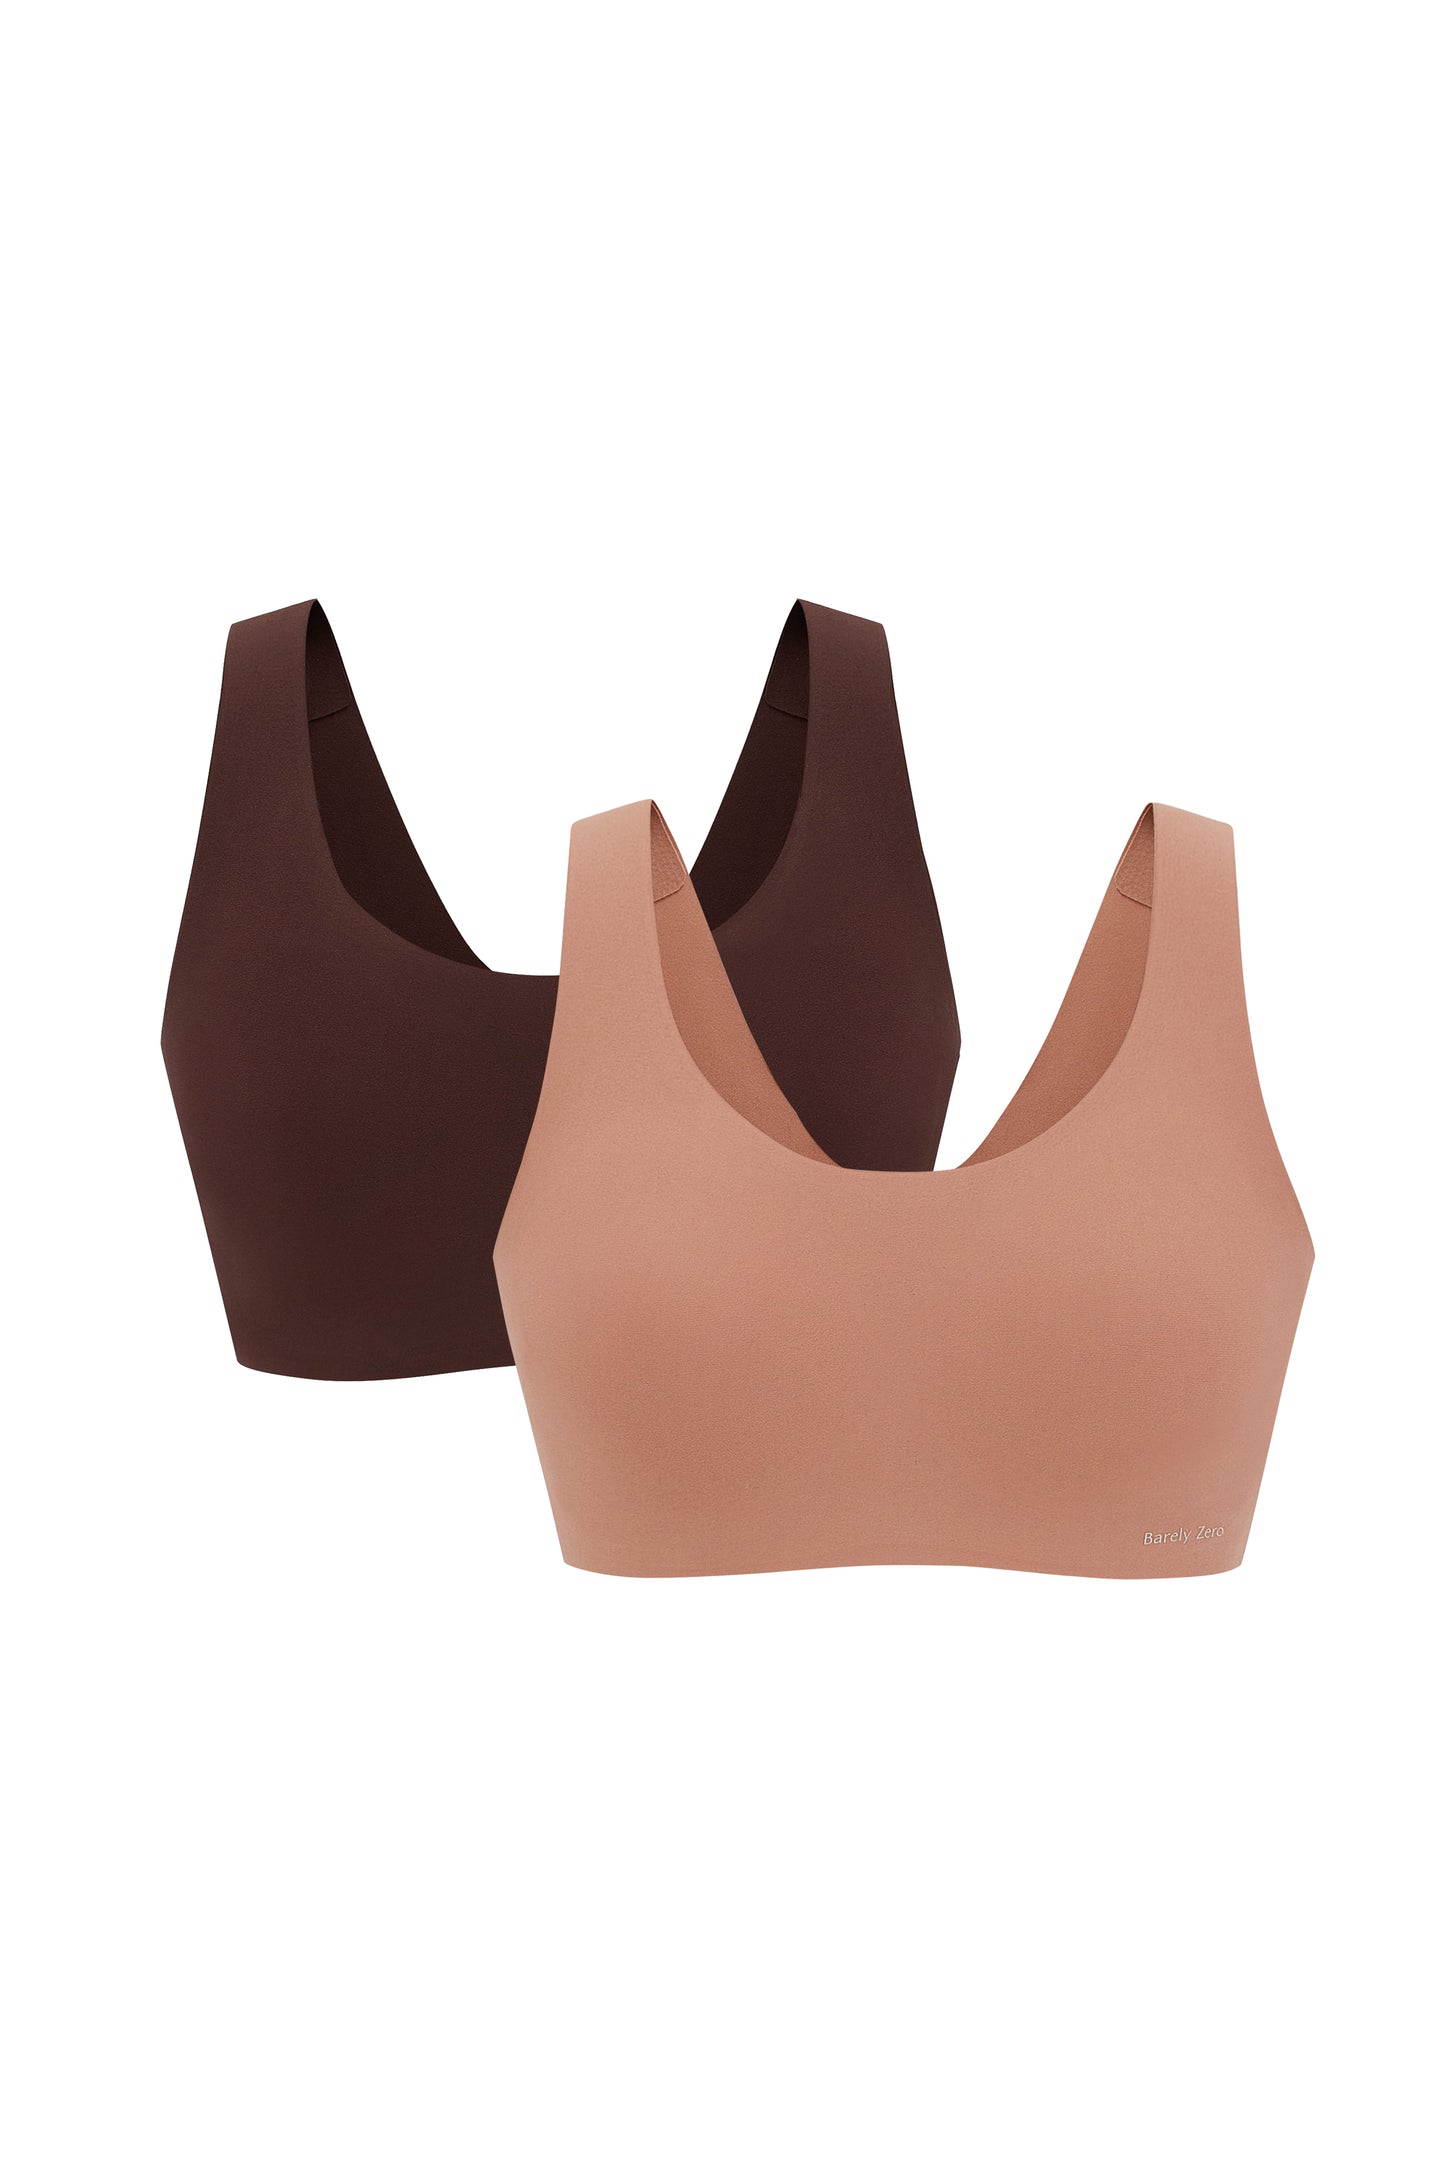 Two Barely Zero Classic Bra in brown shades, one in a darker brown and the other in a cinnamon color, both featuring CloudFit technology, displayed against a white background.